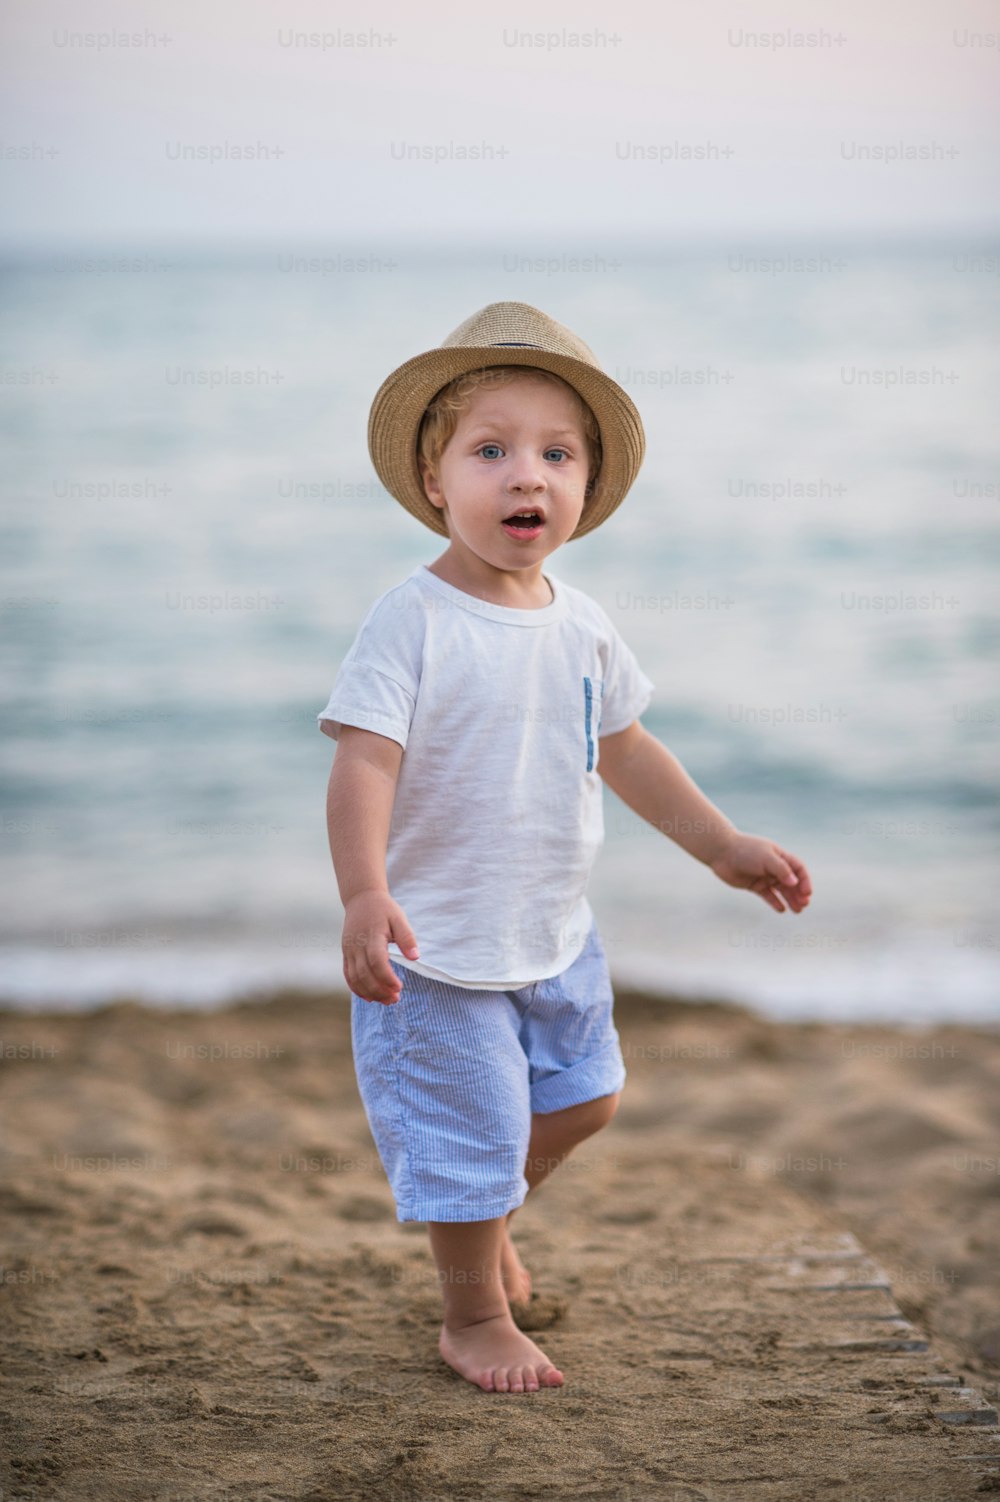 A portrait of small blond toddler boy with hat standing on beach on summer holiday.